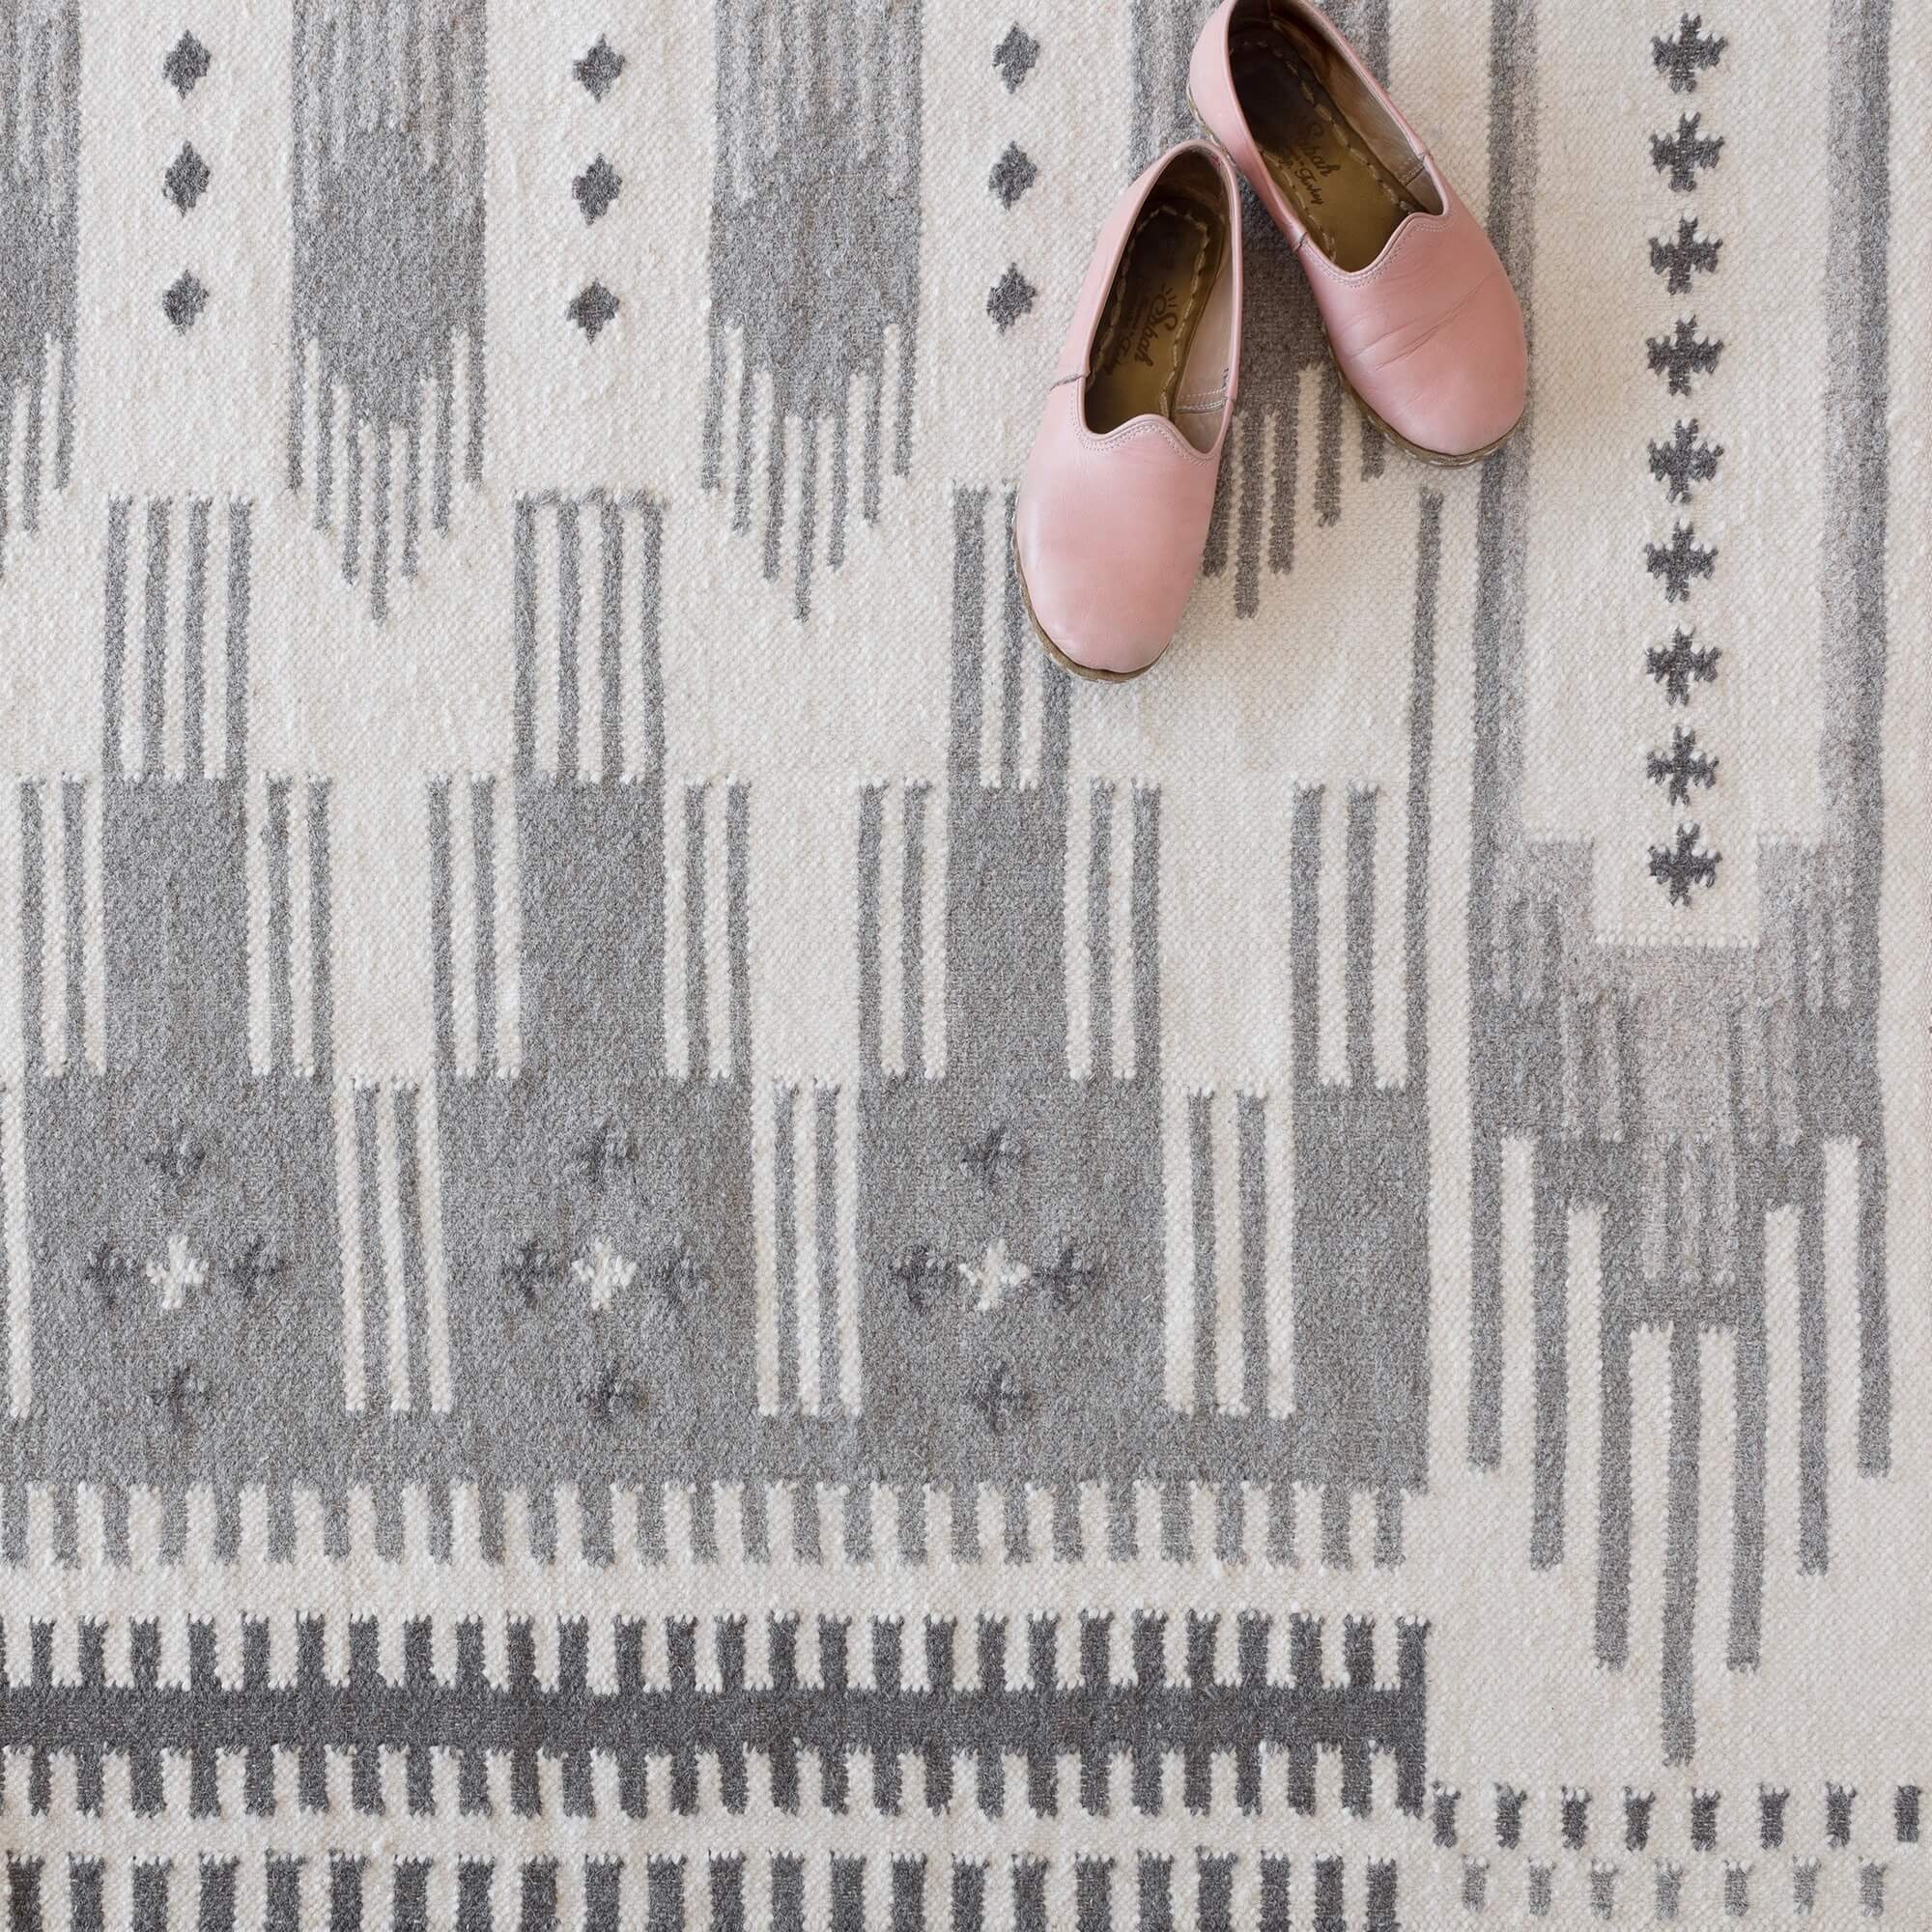 The Citizenry Asha Handwoven Area Rug | 8' x 10' | Grey - Image 5